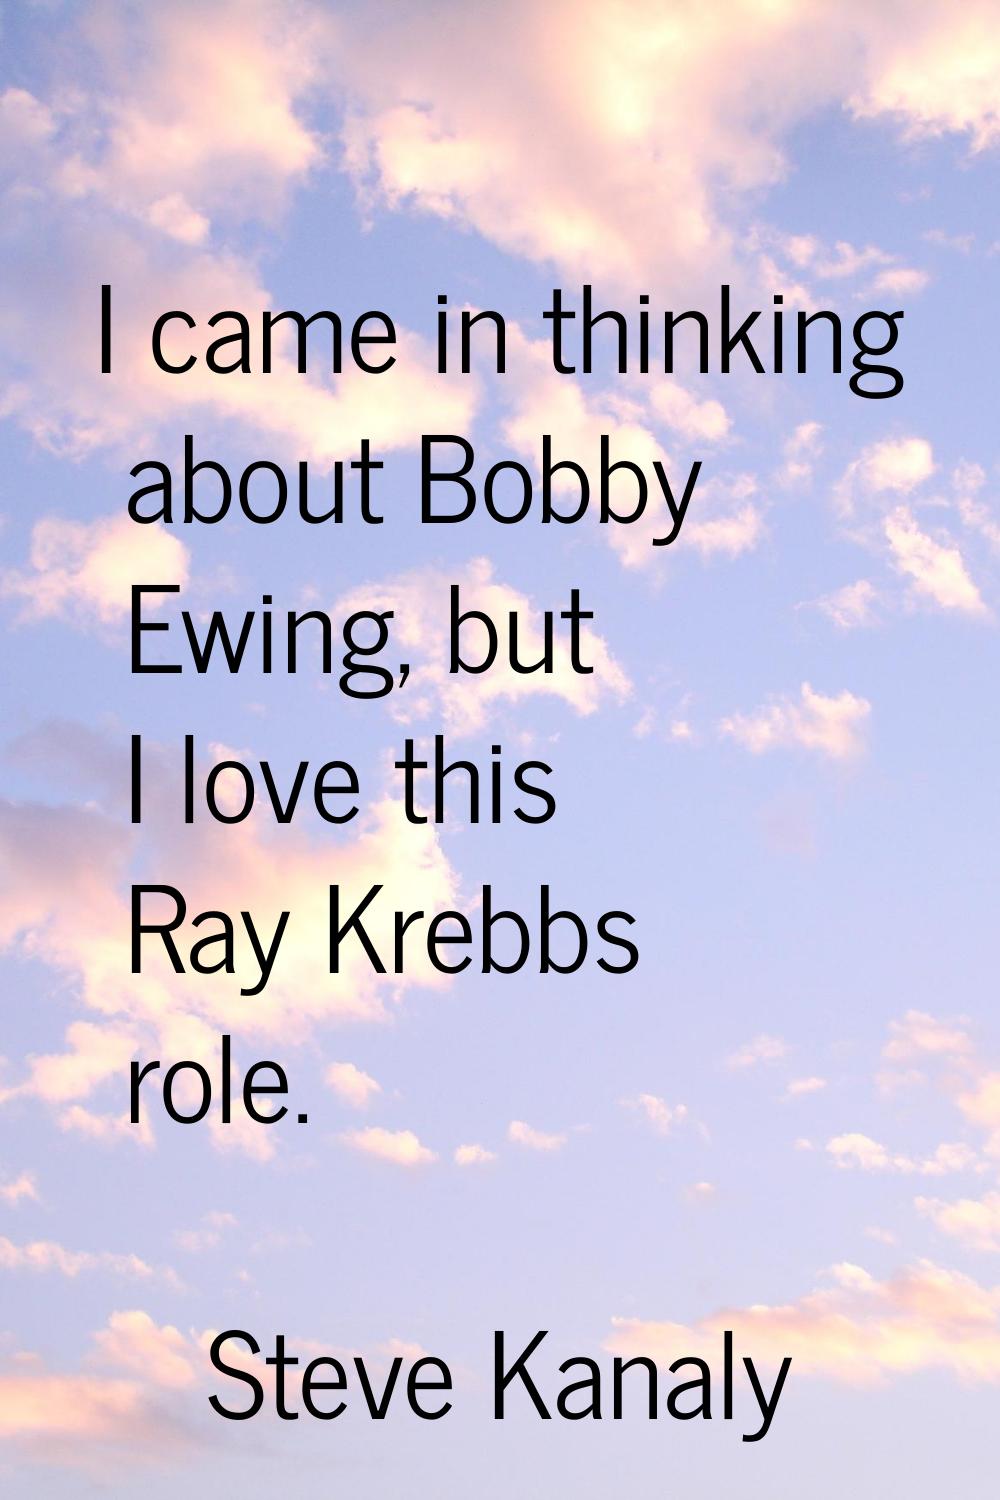 I came in thinking about Bobby Ewing, but I love this Ray Krebbs role.